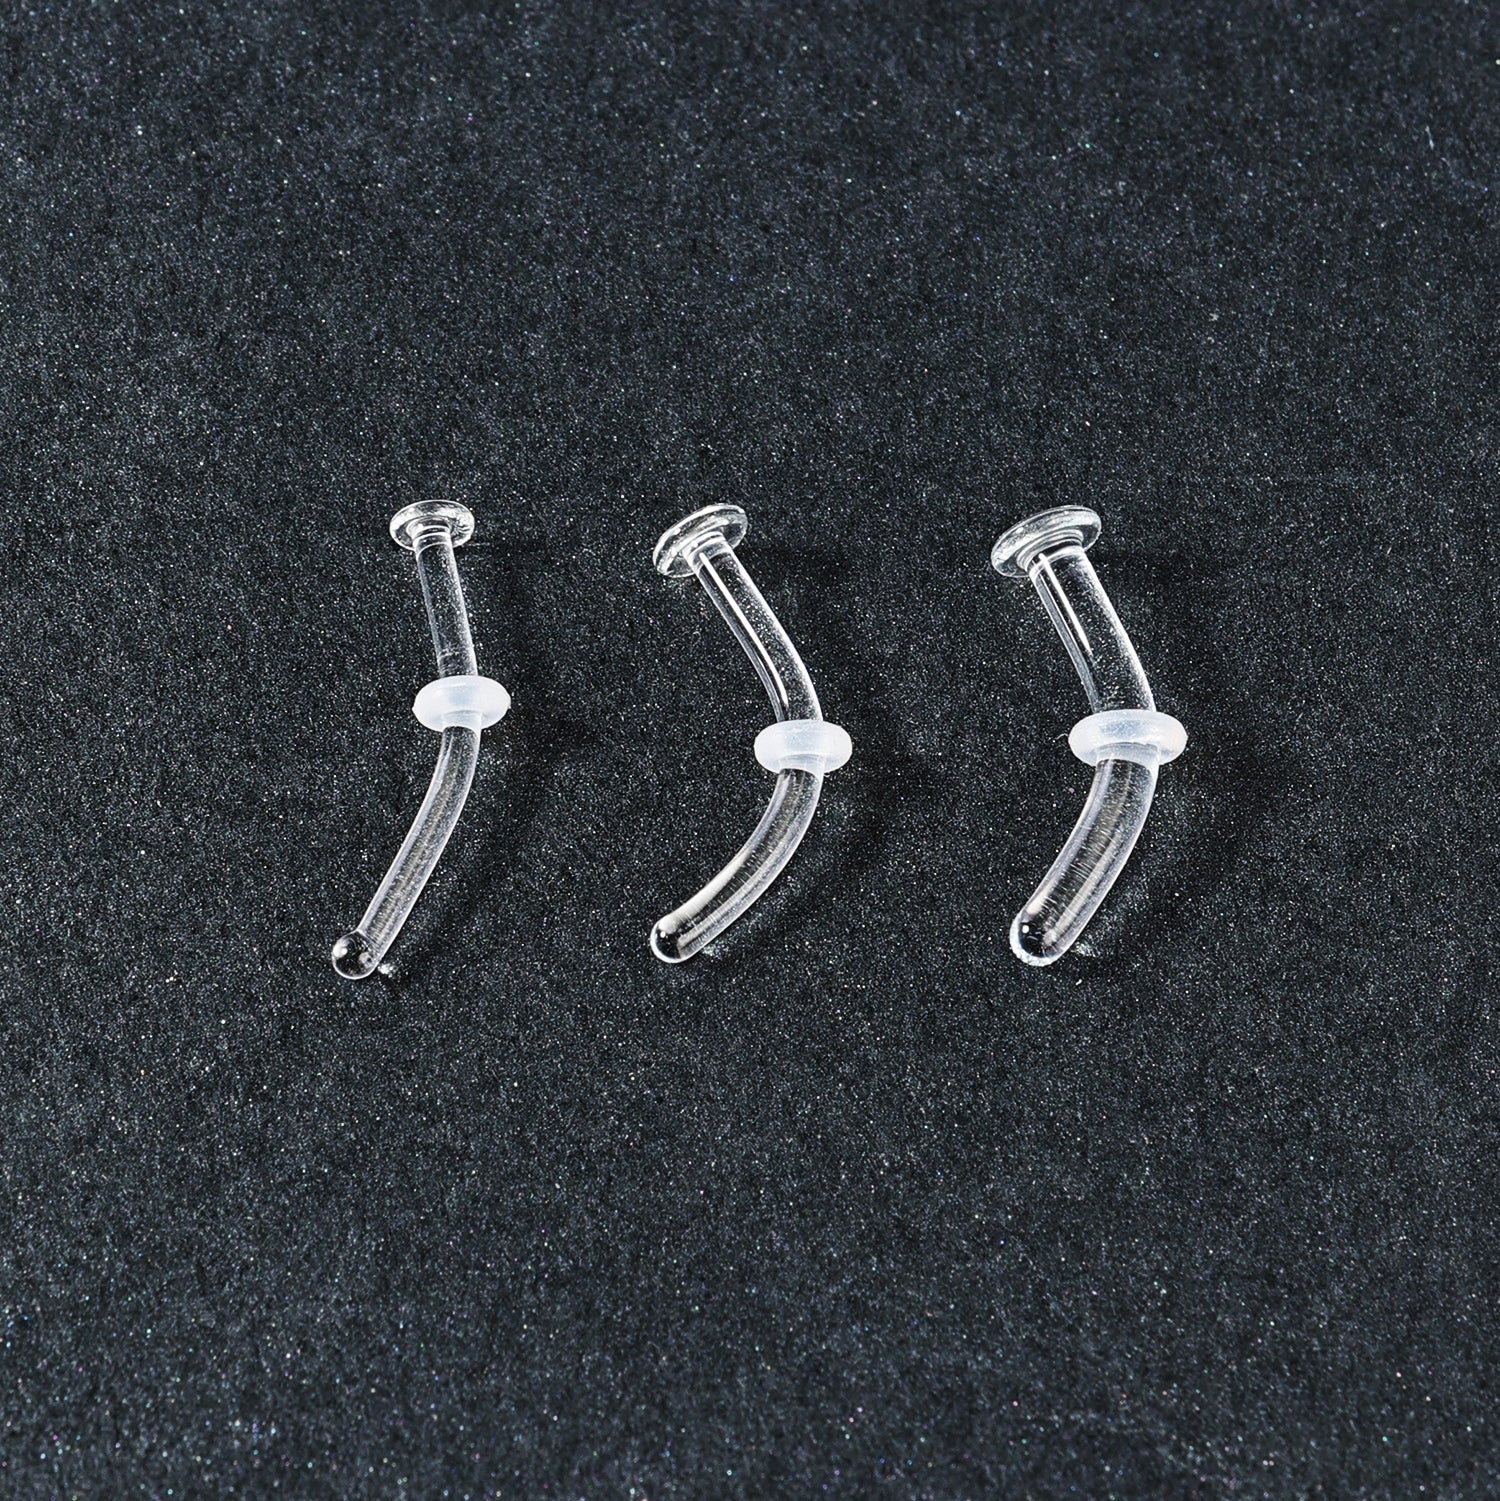 1 PC Nose Studs Piercing L Shape Nose Rings Clear Glass Nostril Piercing